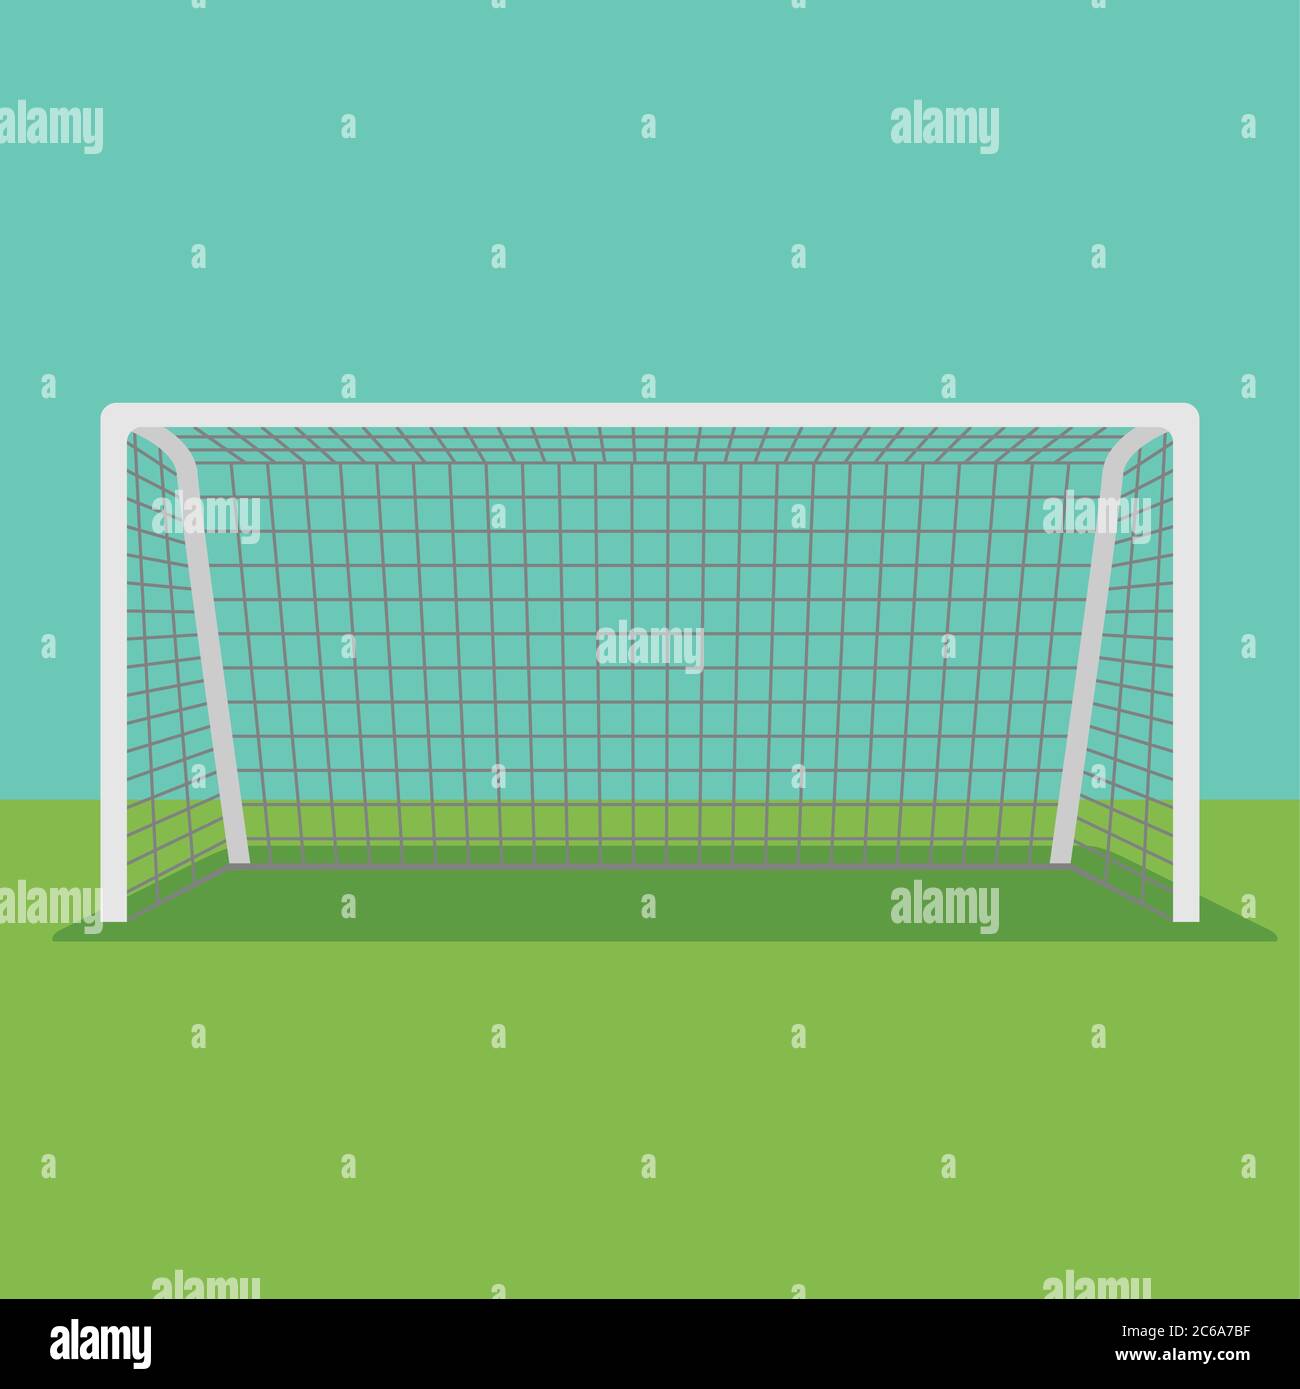 Soccer Goal Flat Icon Vector On Background Stock Vector Image Art Alamy